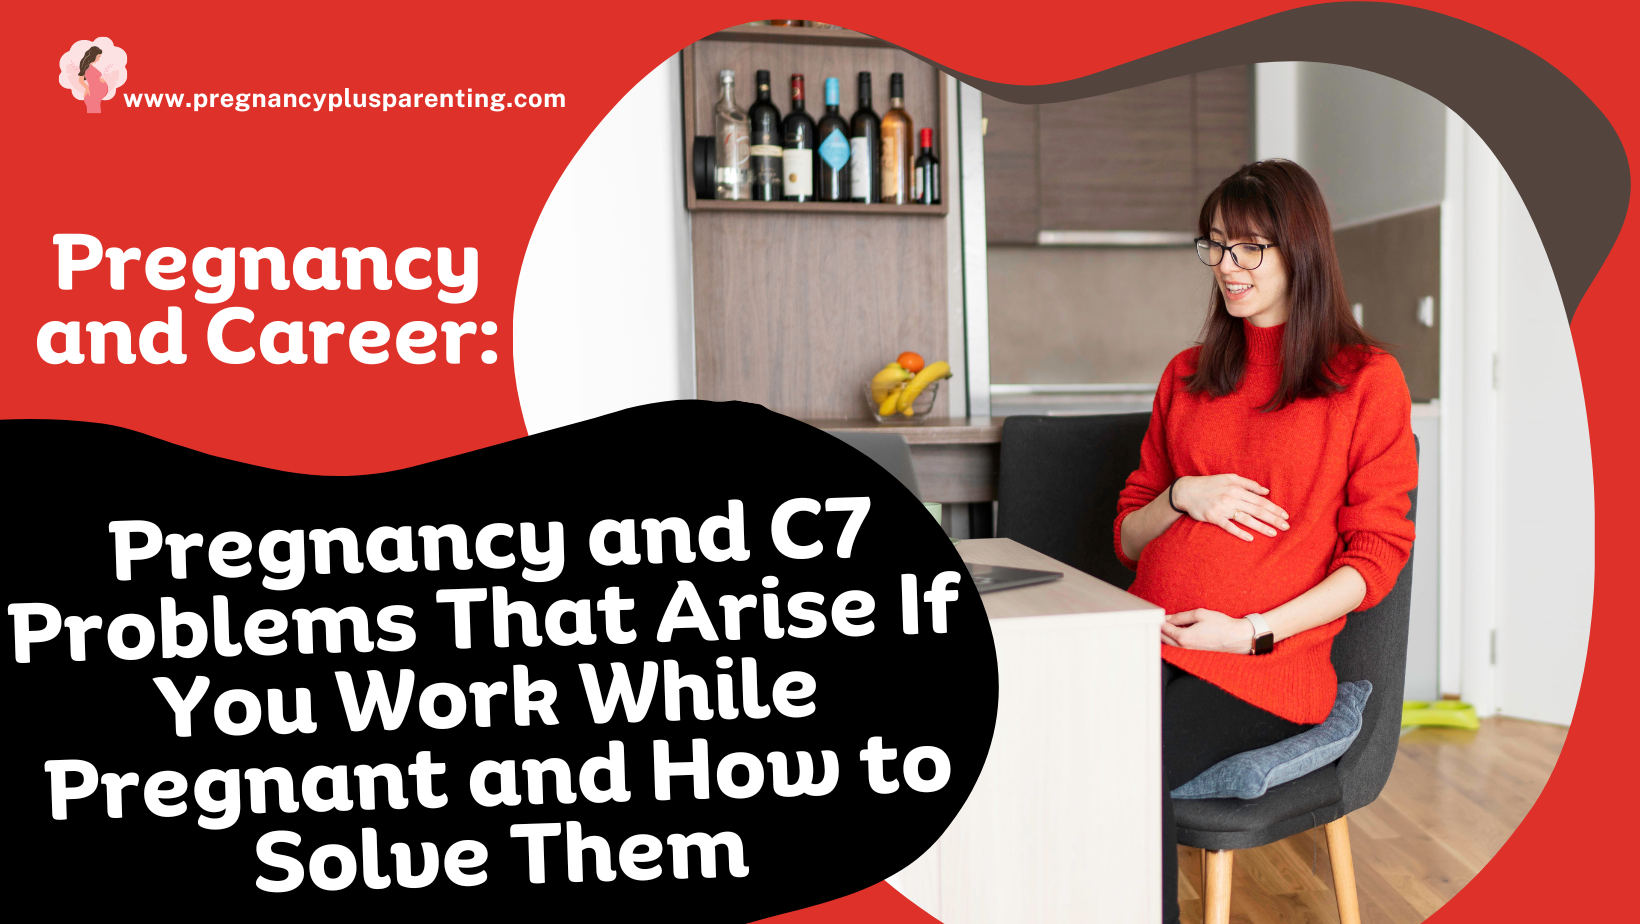 Pregnancy and Career: 7 Problems That Arise If You Work While Pregnant and How to Solve Them